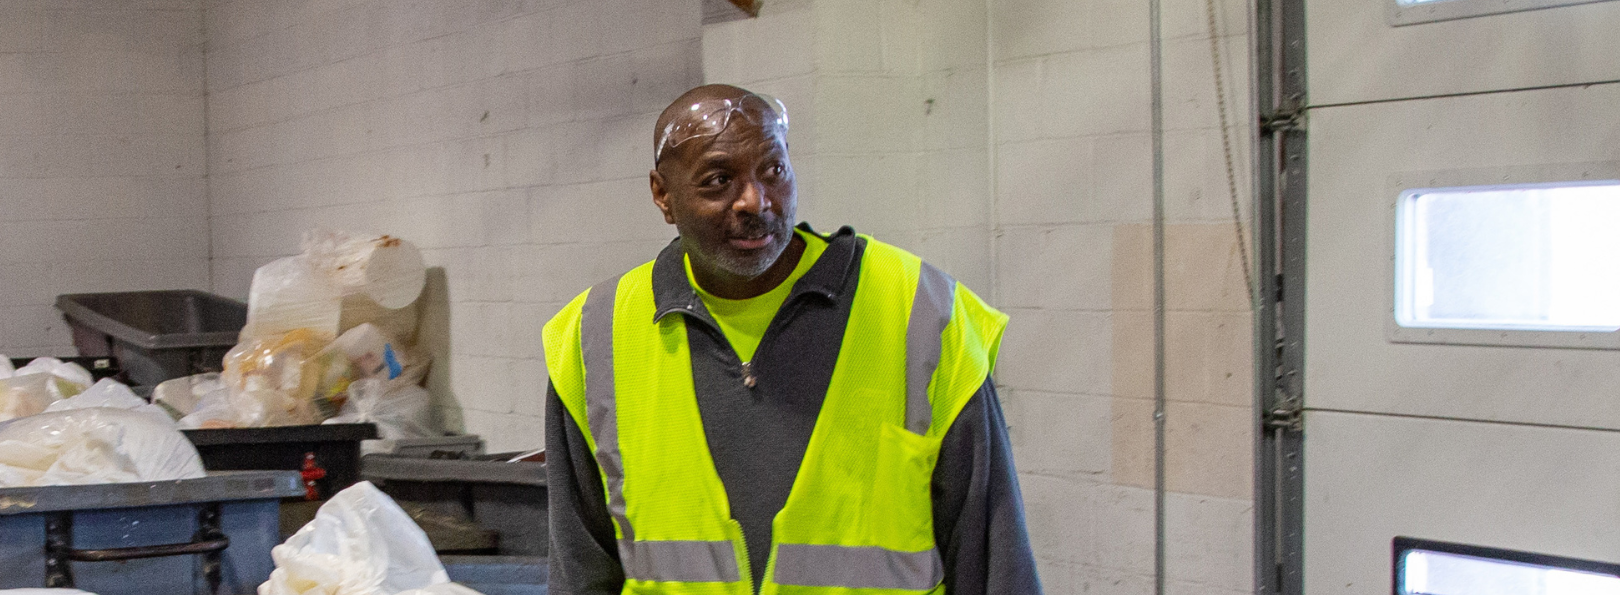 Dwayne Holmes in the recycling facility with a cart